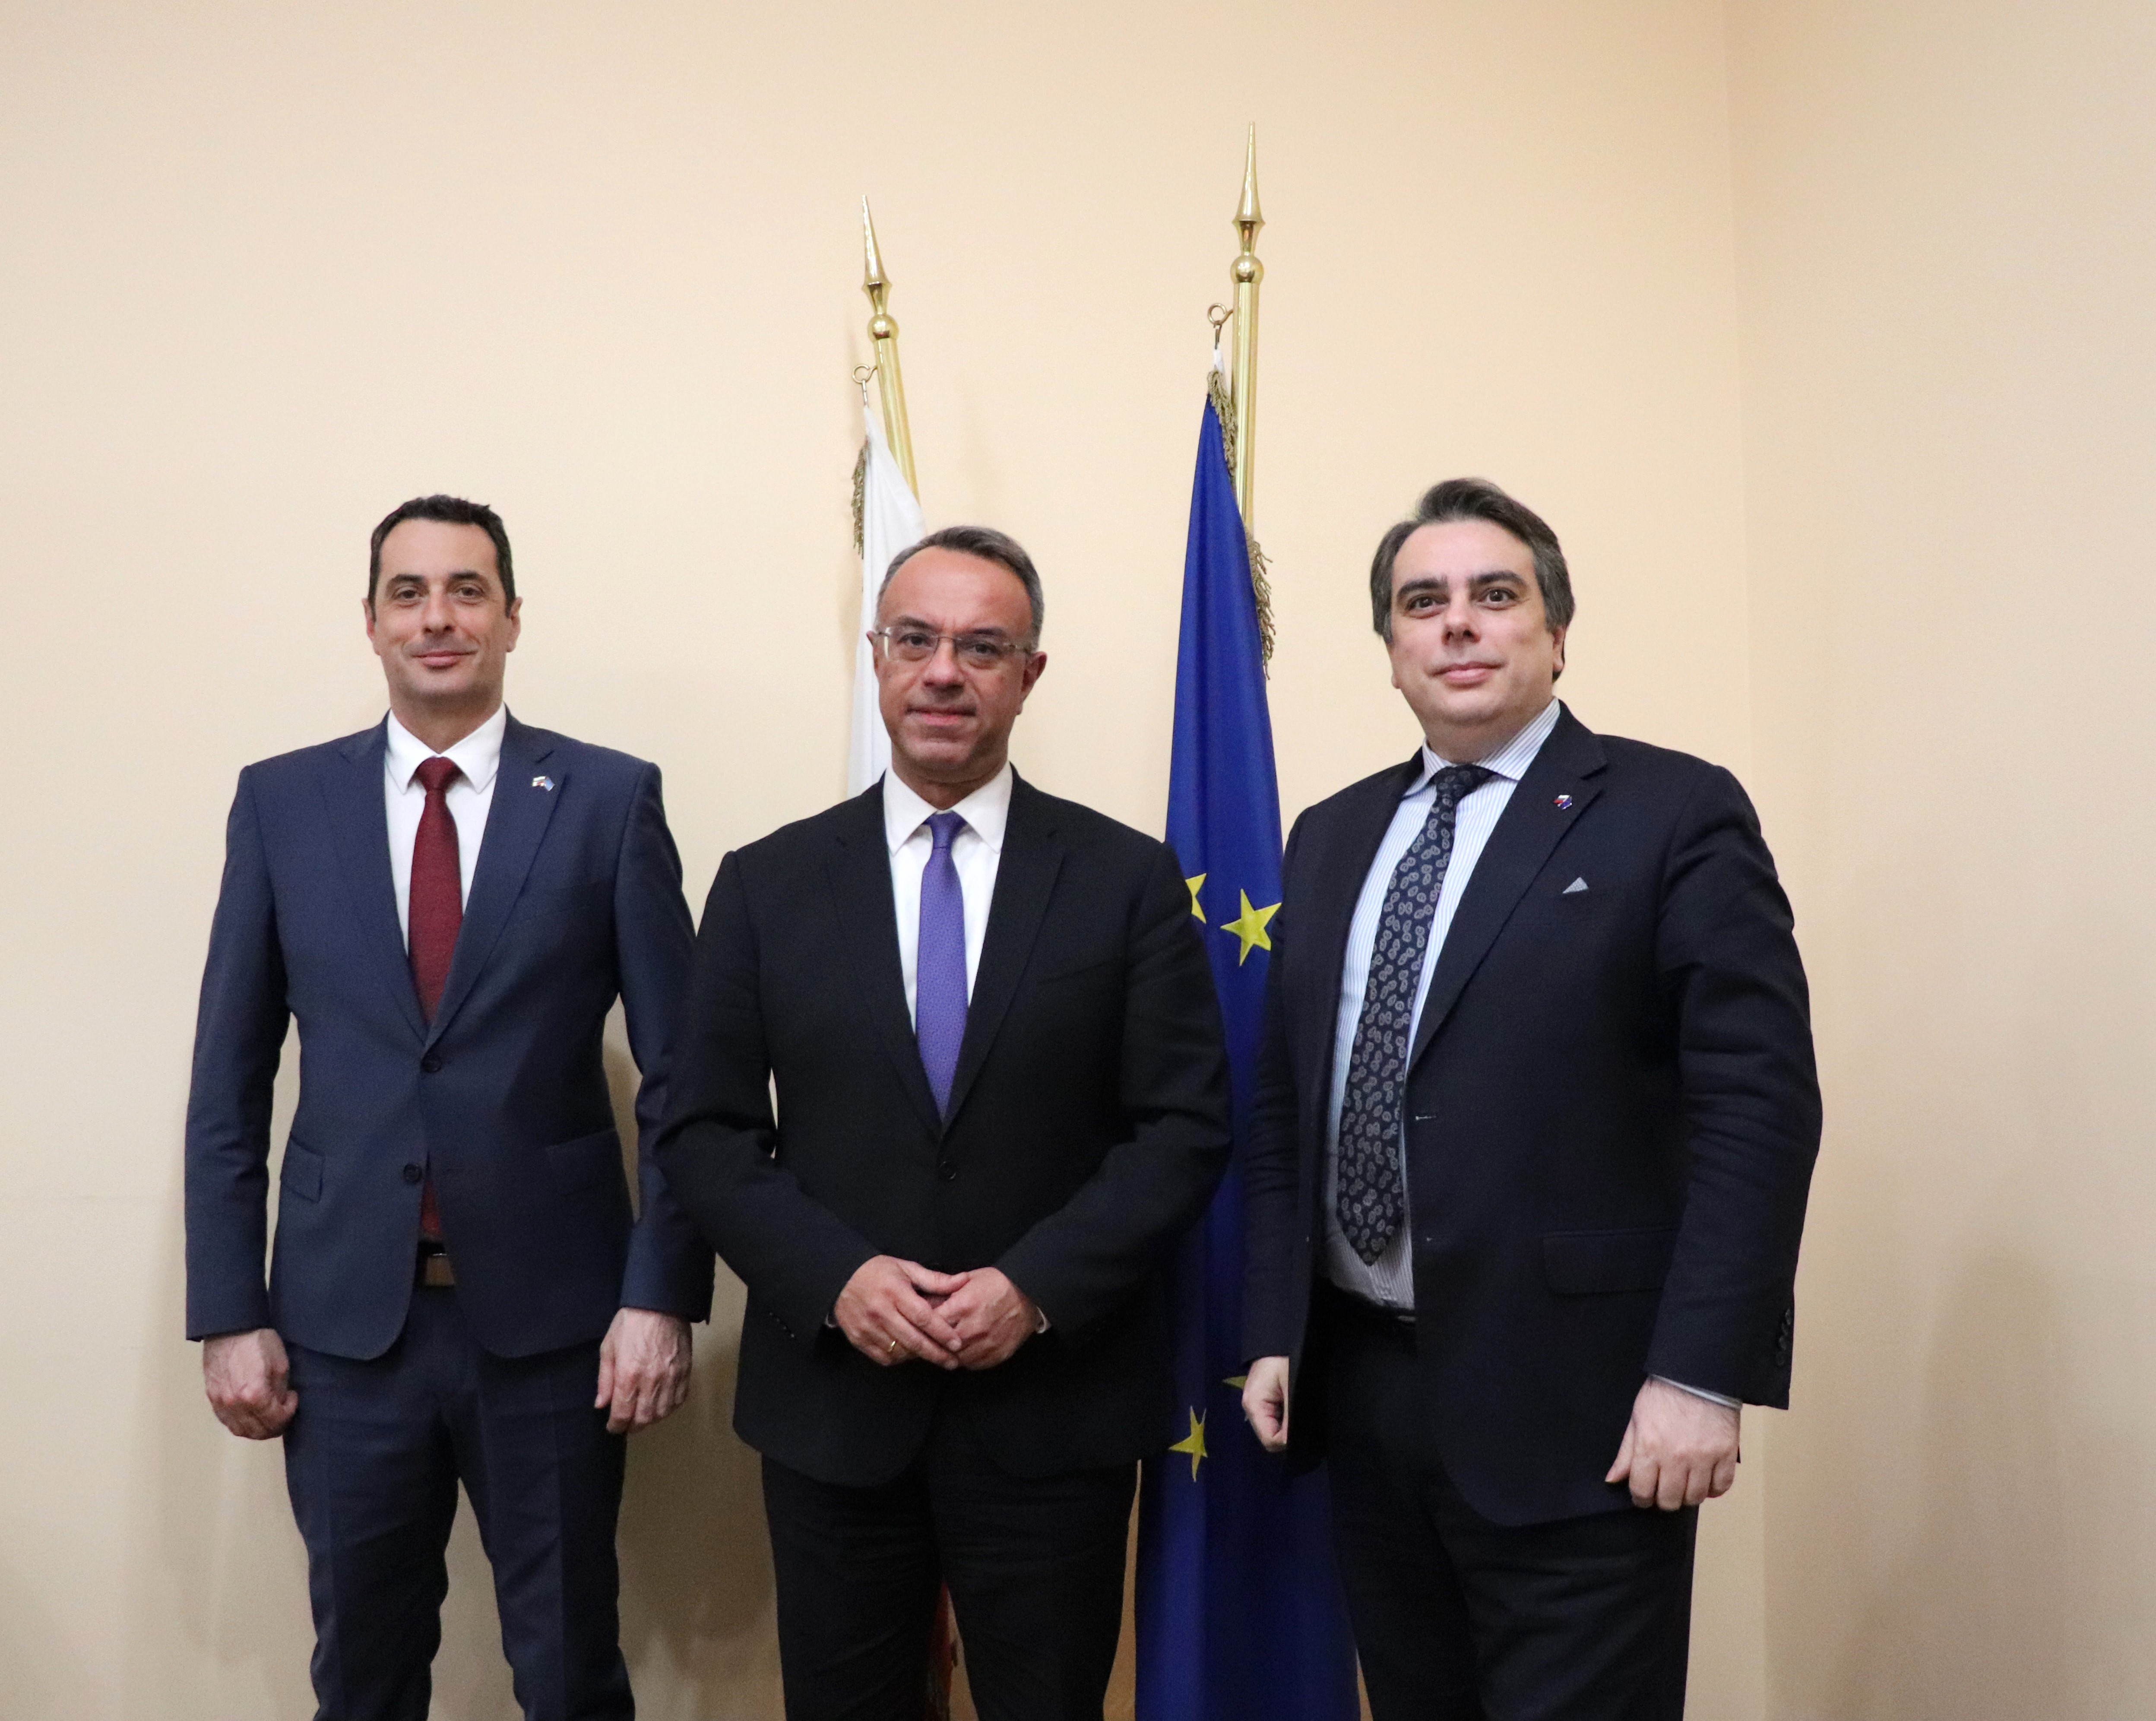 Minister Assen Vassilev had a meeting with the Greek Minister of Infrastructure and Transport Christos Staikouras